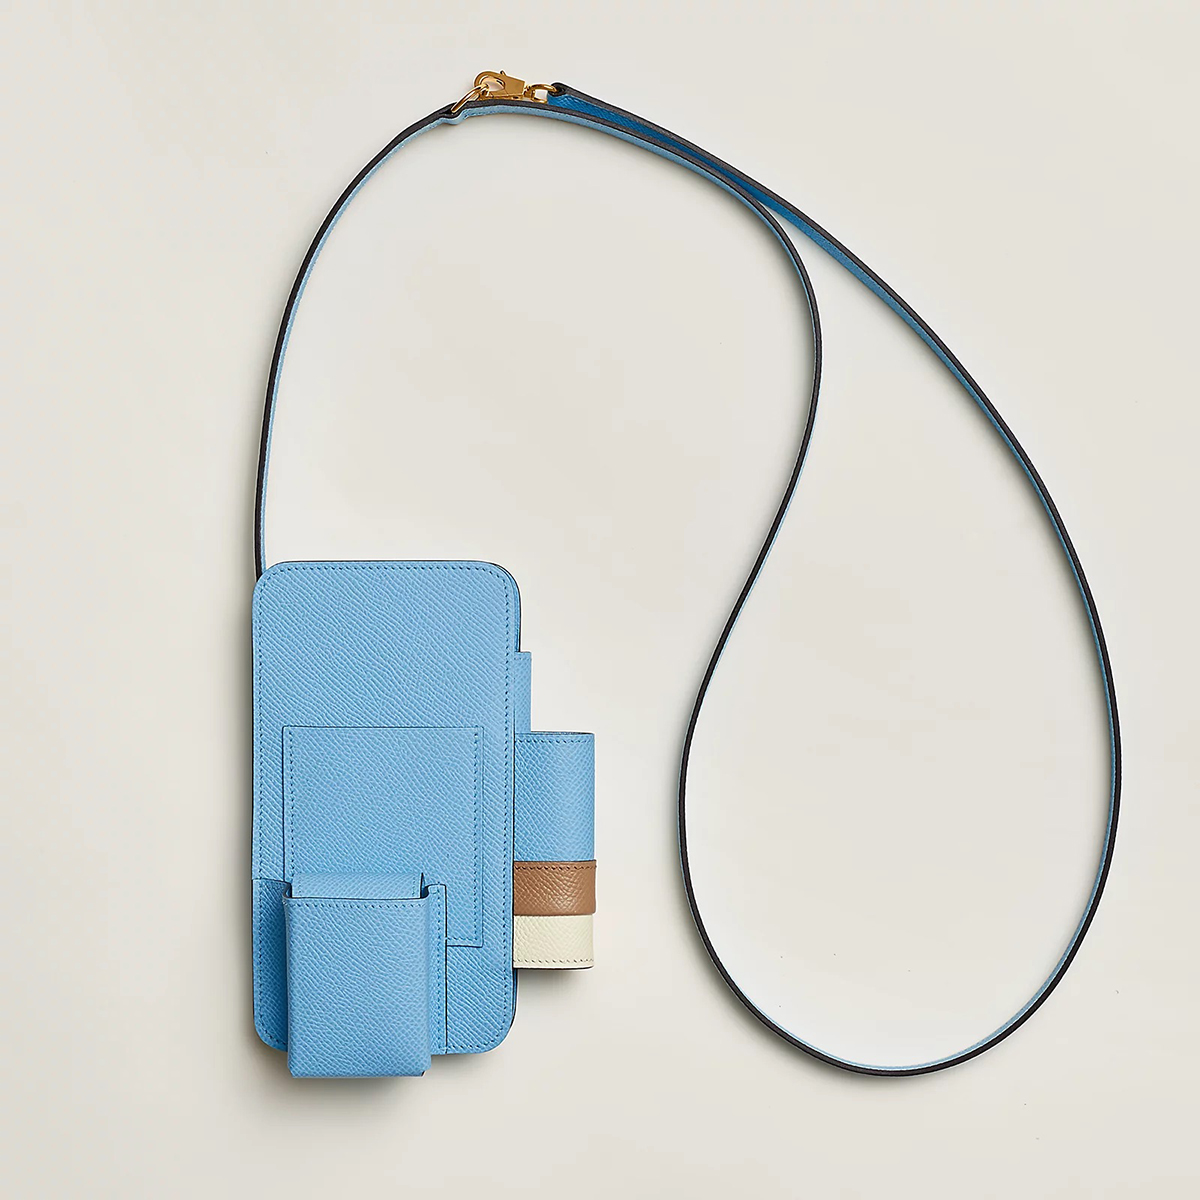 The Hermèsway Phone Case features a phone pouch, card slot, AirPods case, and lipstick holder. Hermèsway in Celeste/Chai/Nata. Photo via Hermes.com.